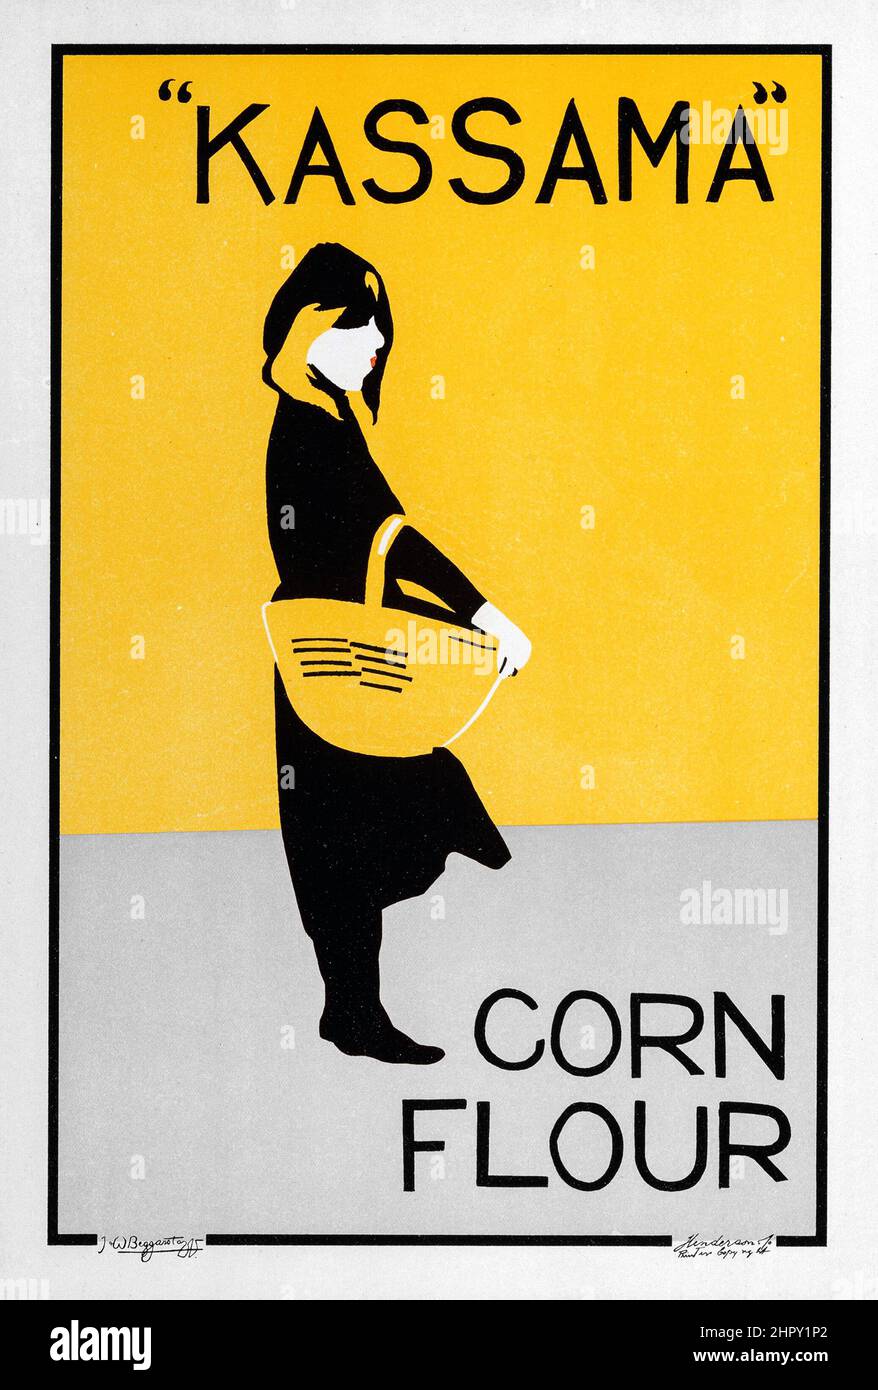 Beggarstaff Brothers - Corn Flour Kassama - poster from the 'Les Maitres de L'affiche' series. Plate 232. C 1900. Stock Photo